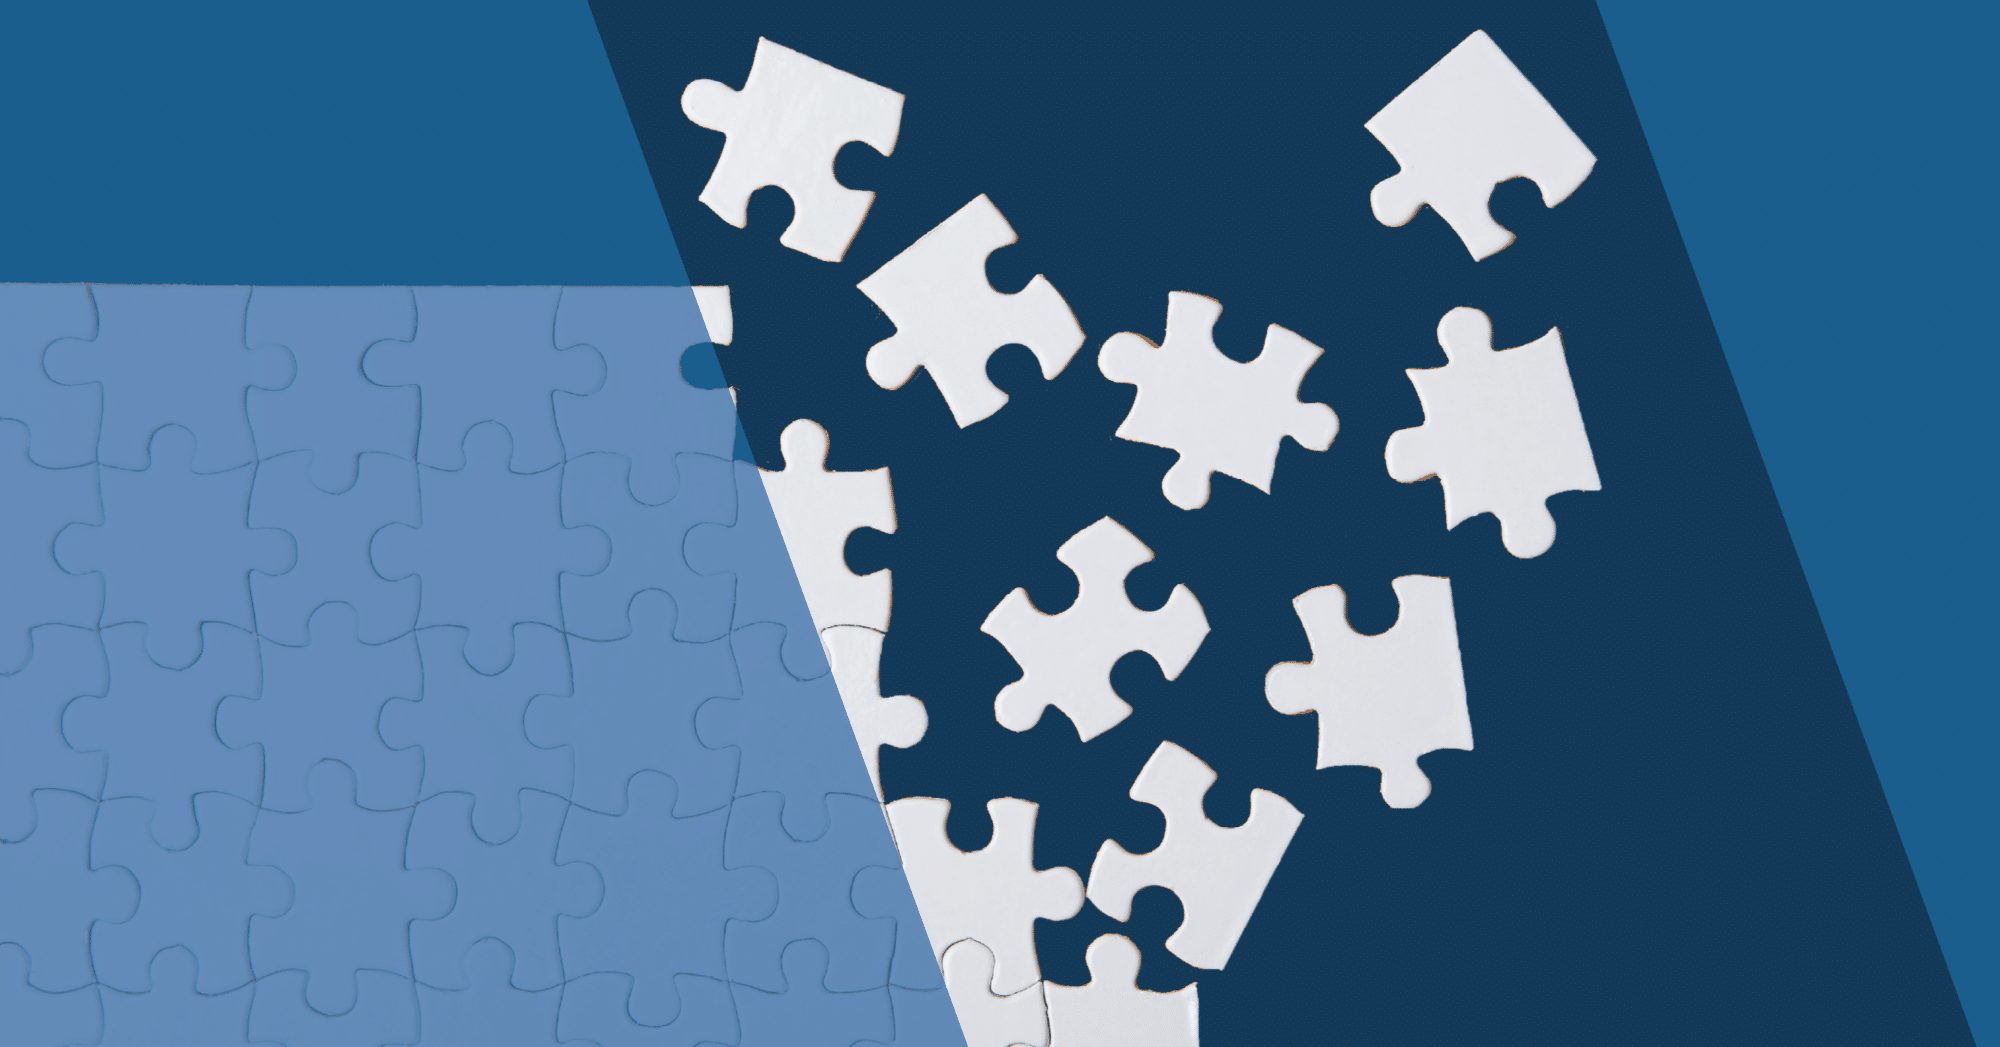 2021 3rd Quarter Commentary: “Updating an Outdated Jigsaw Puzzle”